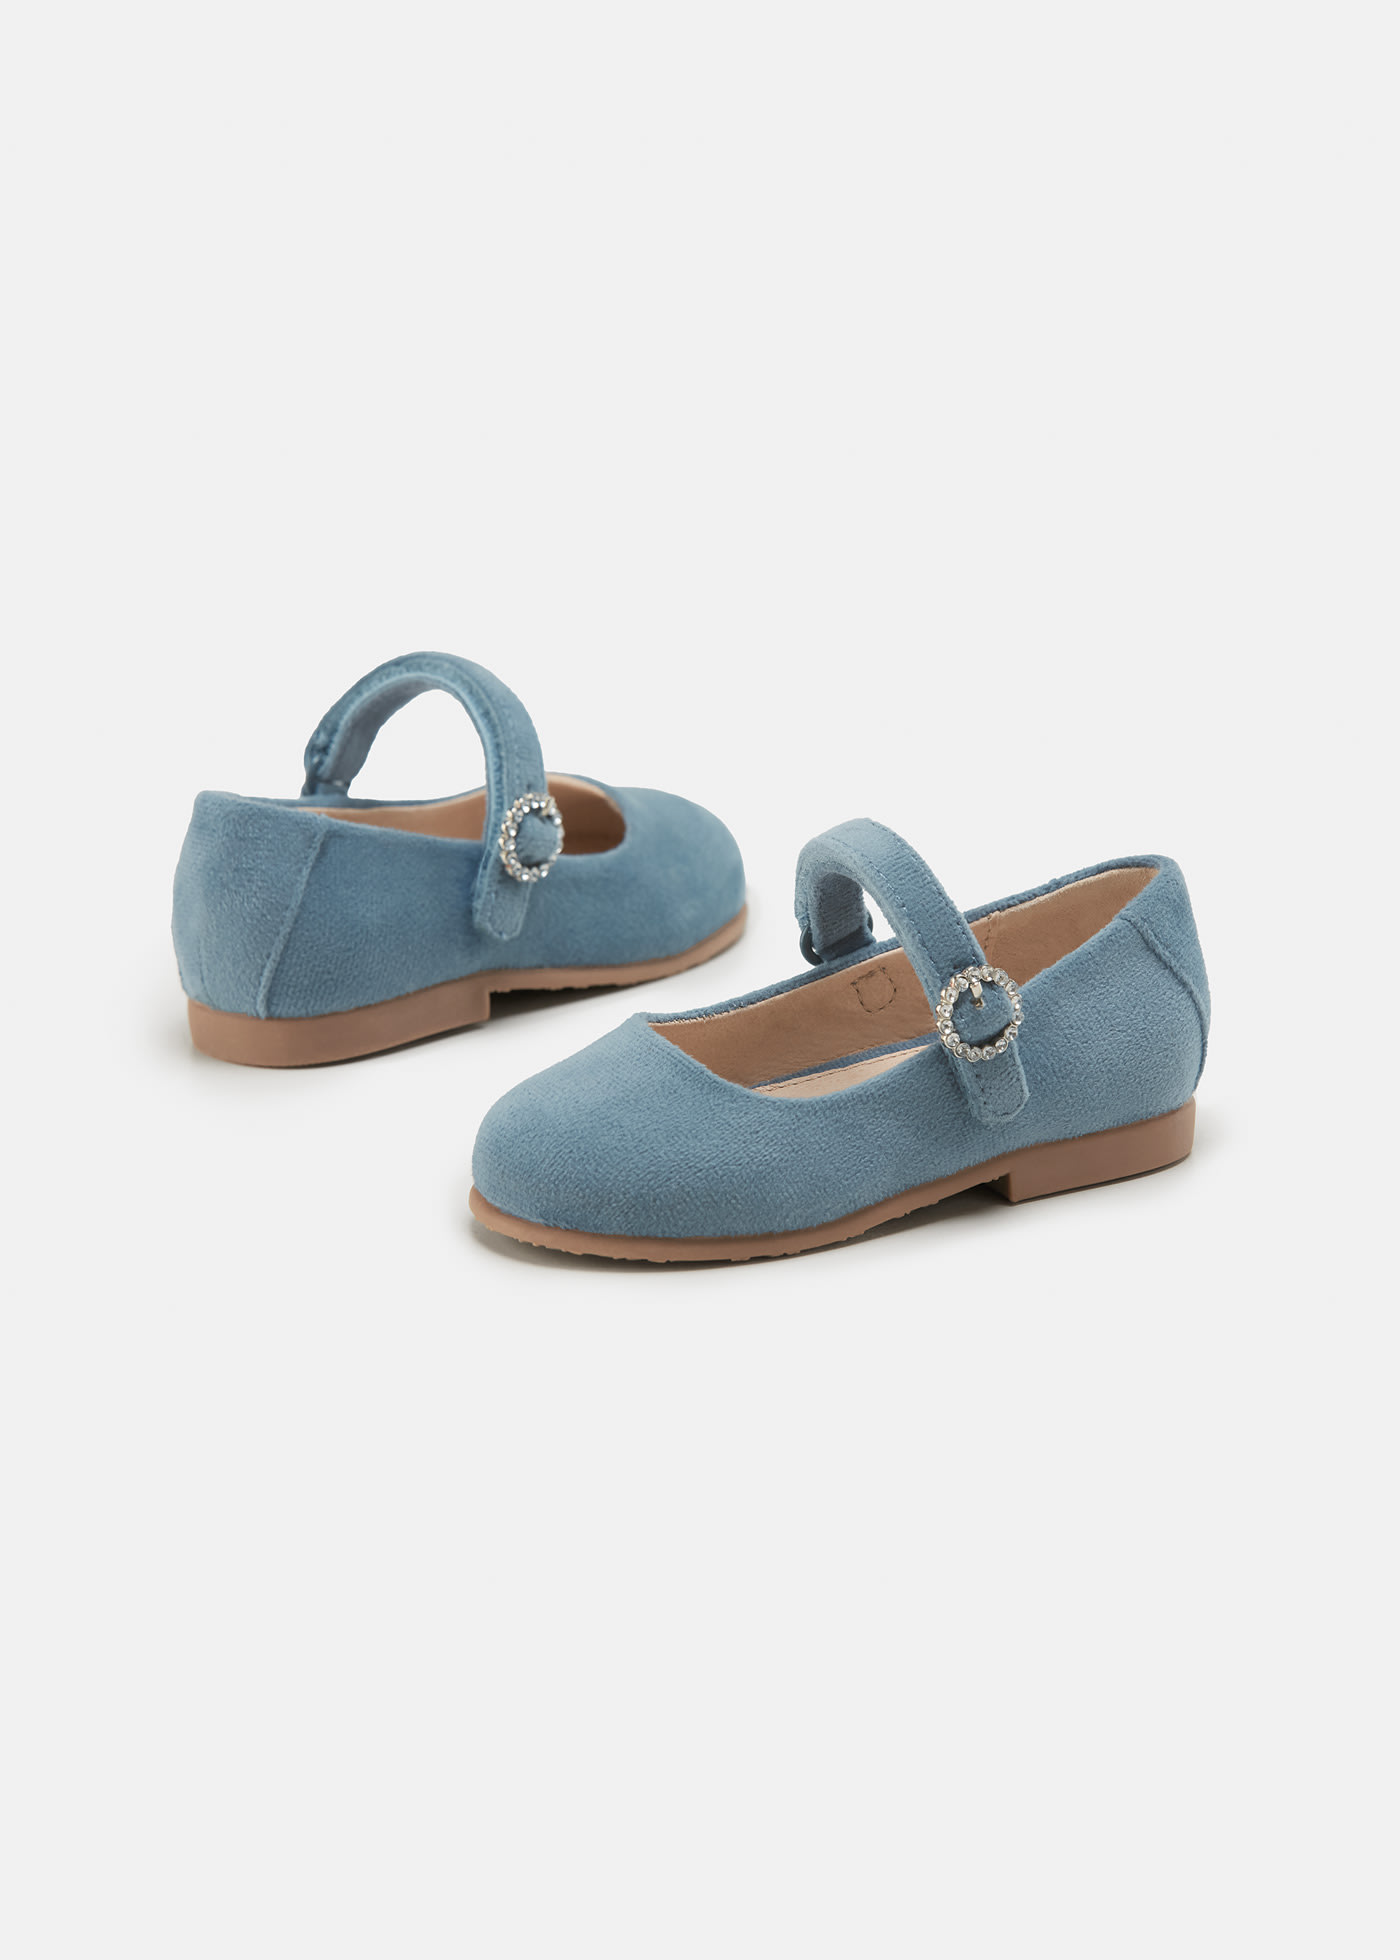 Velvet mary janes sustainable leather baby